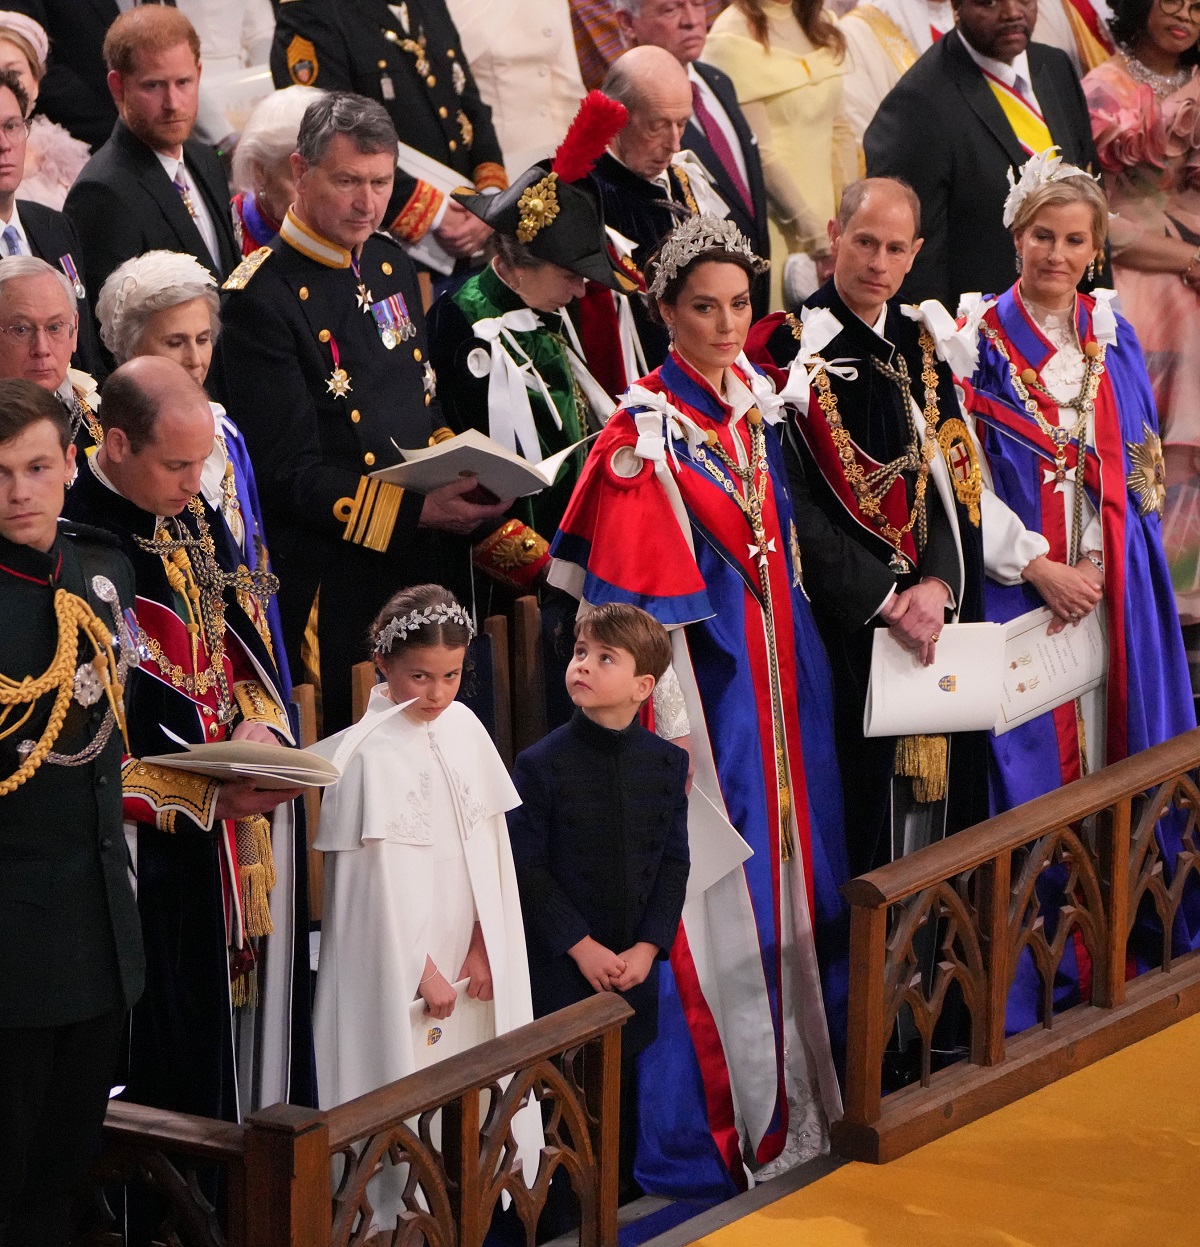 Prince William, Prince Harry, and other members of the royal family standing inside Westminster Abbey for King Charles III's coronation